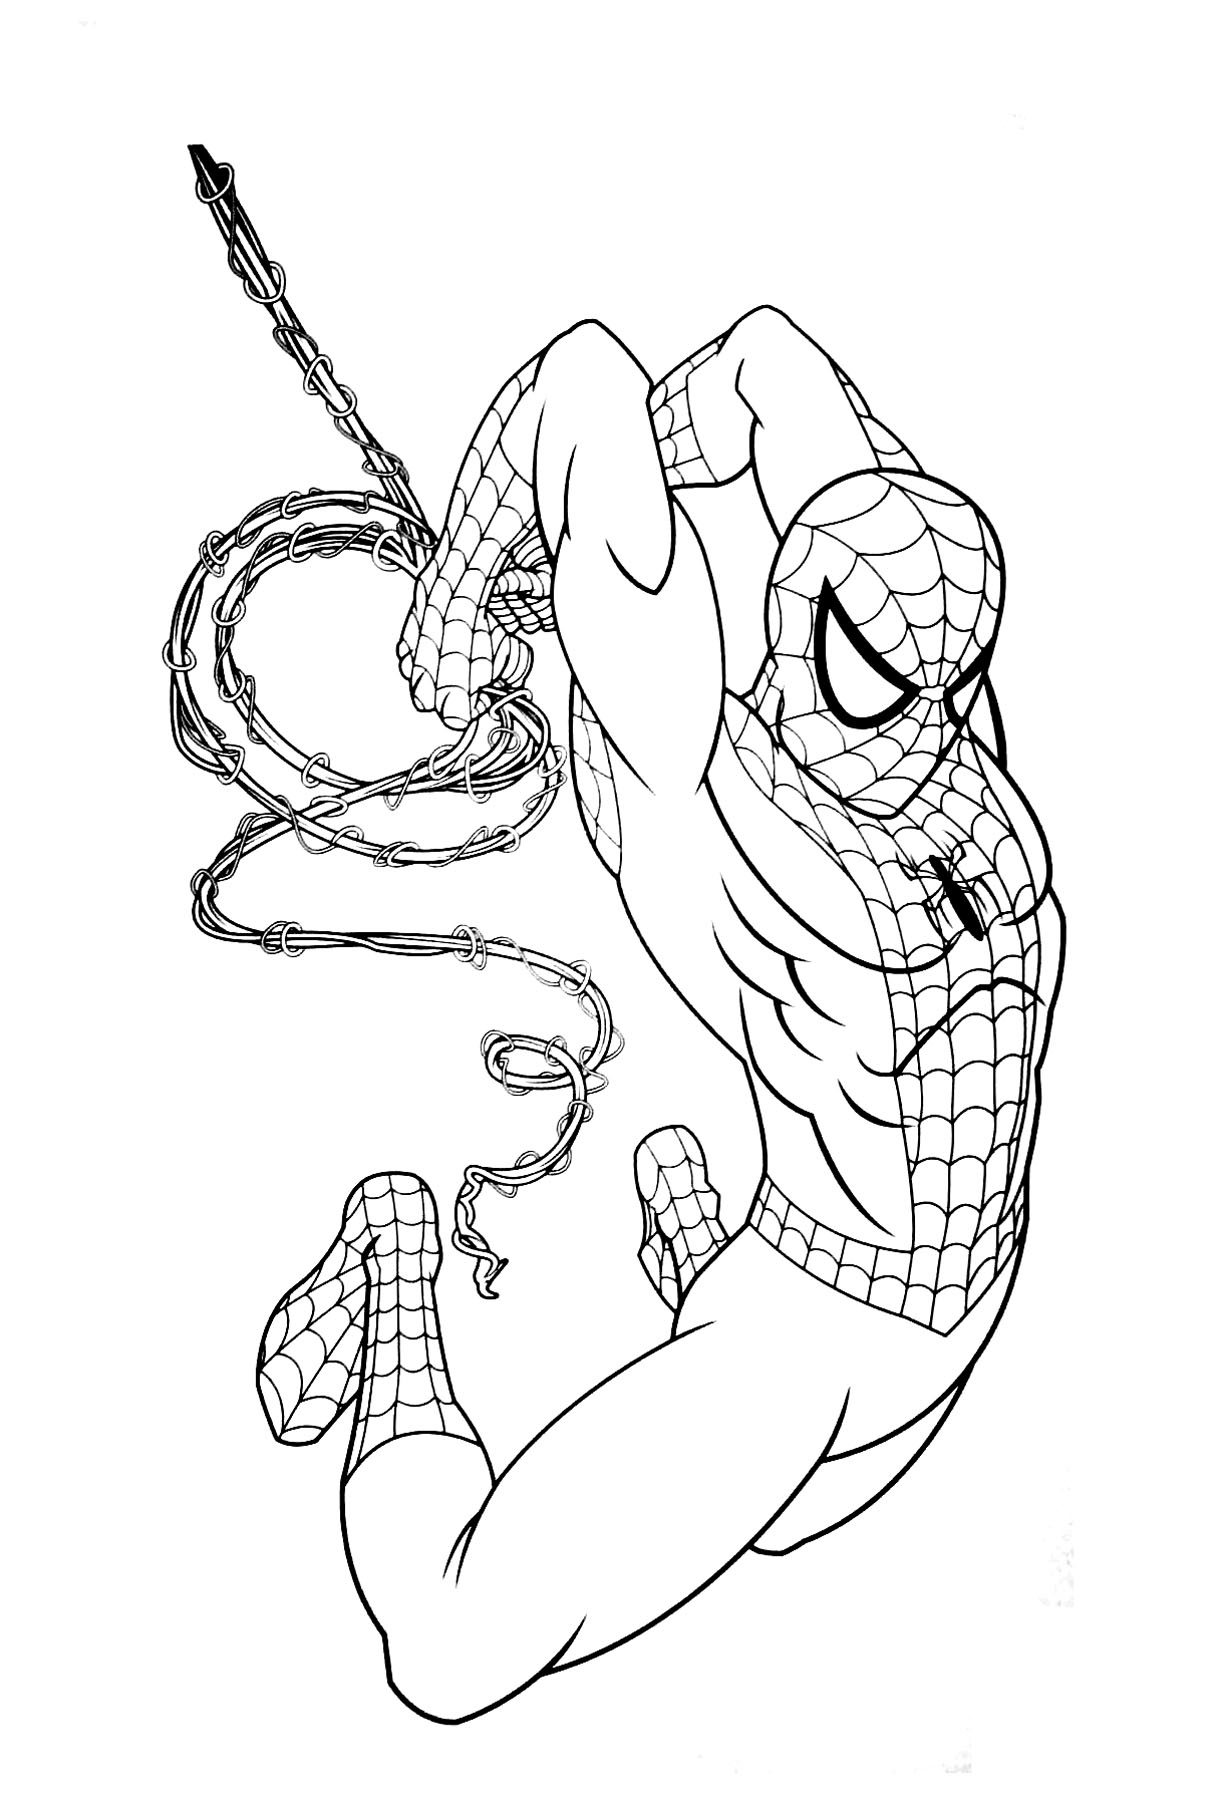 Spiderman free to color for children Spiderman Kids Coloring Pages